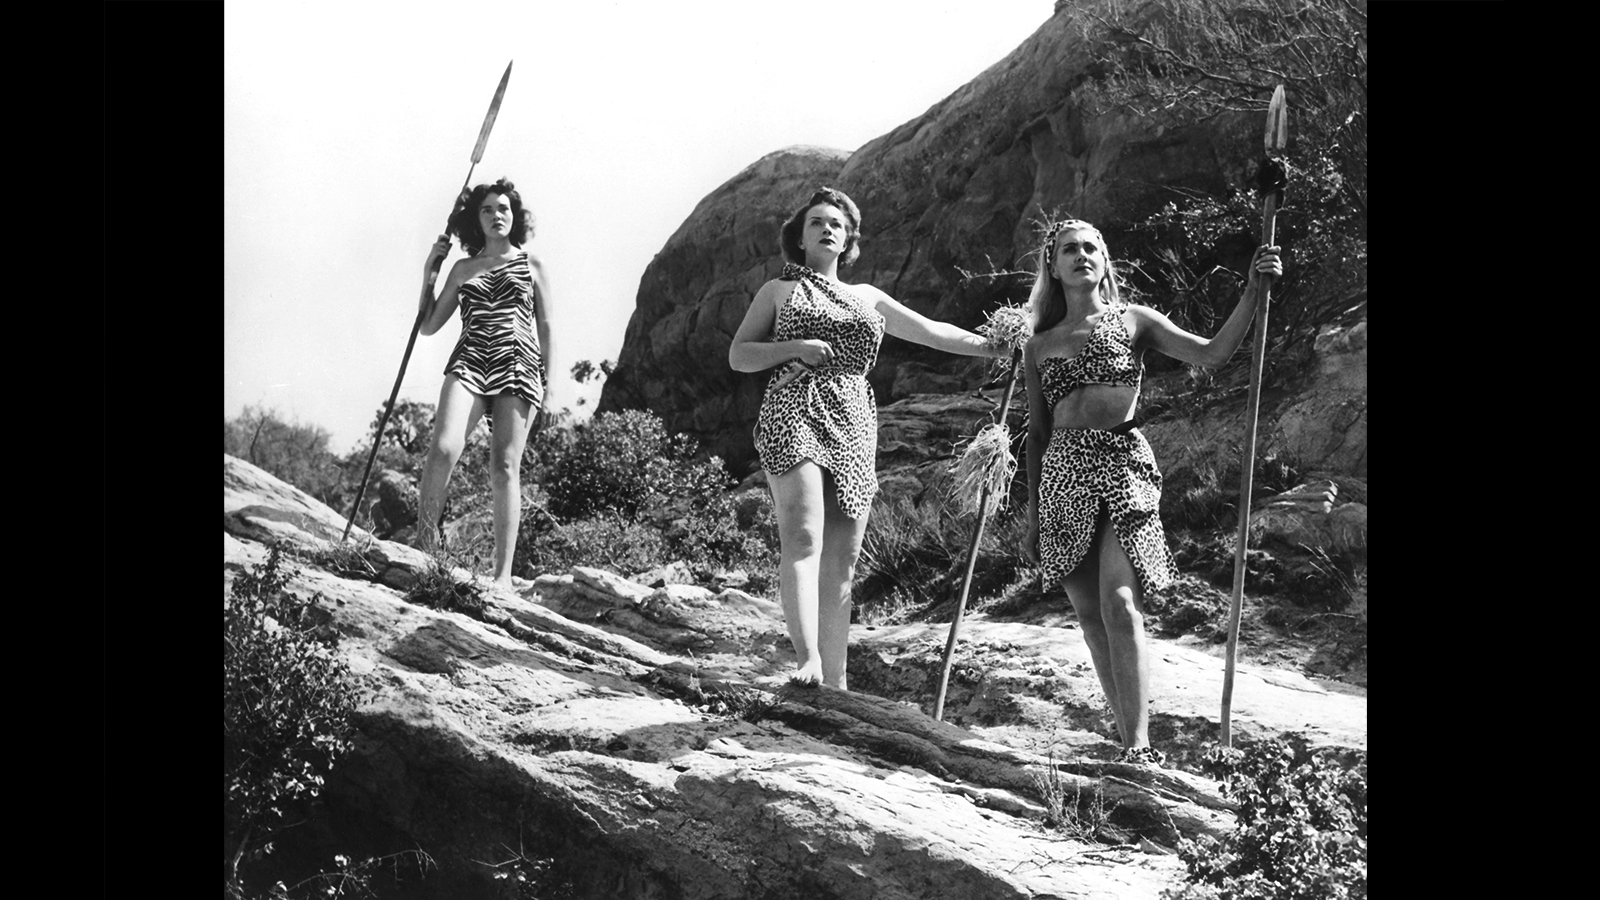 Three women, embodying the male hunter myth, standing confidently on a rock and armed with spears.